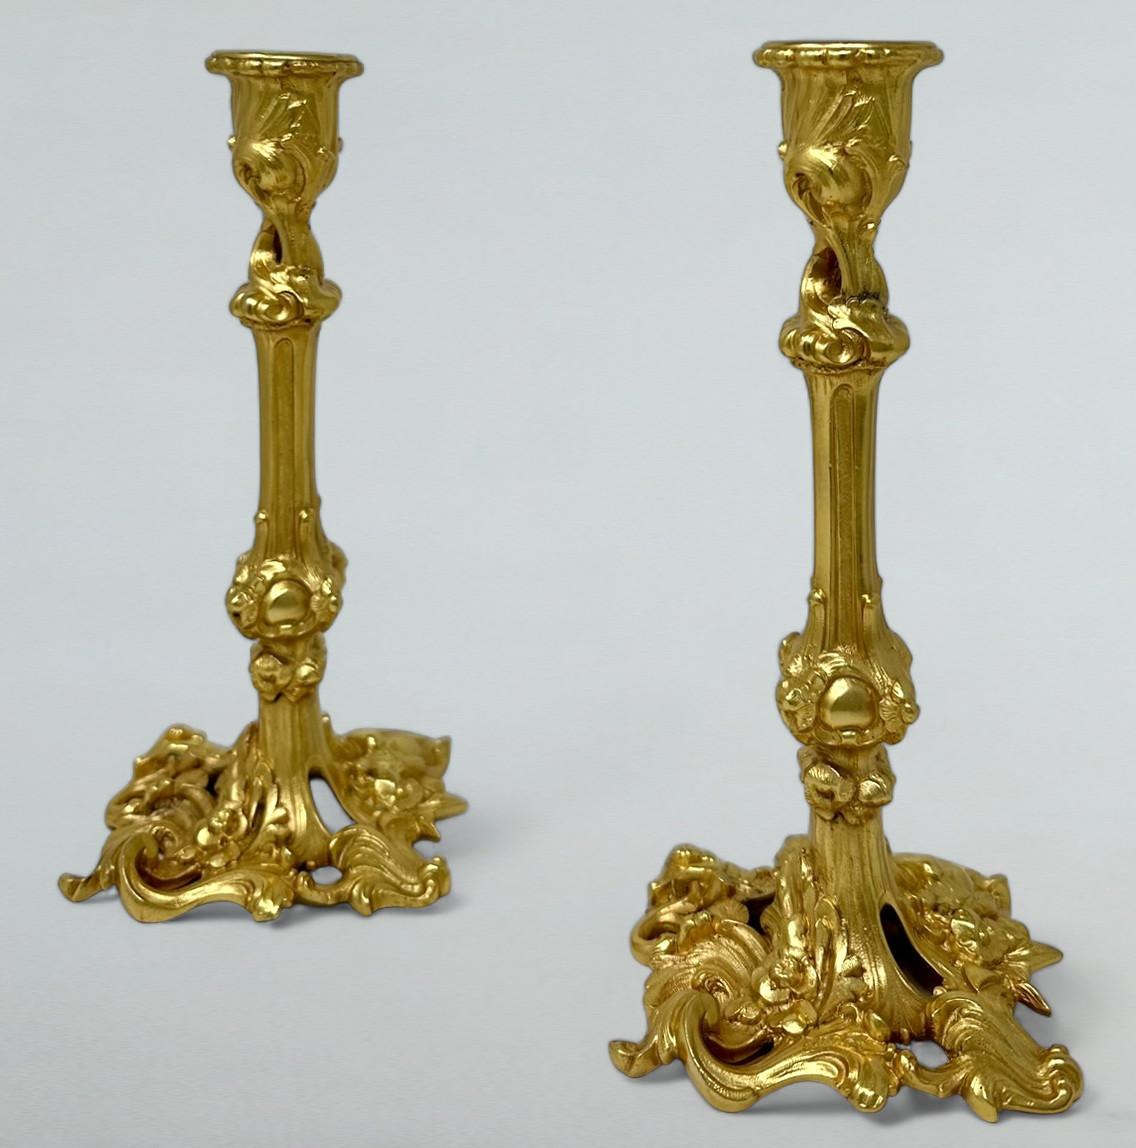 Stylish Pair of early Edwardian French heavy gauge Ormolu Single Light Table Candlesticks of outstanding quality and generous proportions.  

Each with shaped spreading bases with highly chisel cast shell and scrolling cast corners details, the